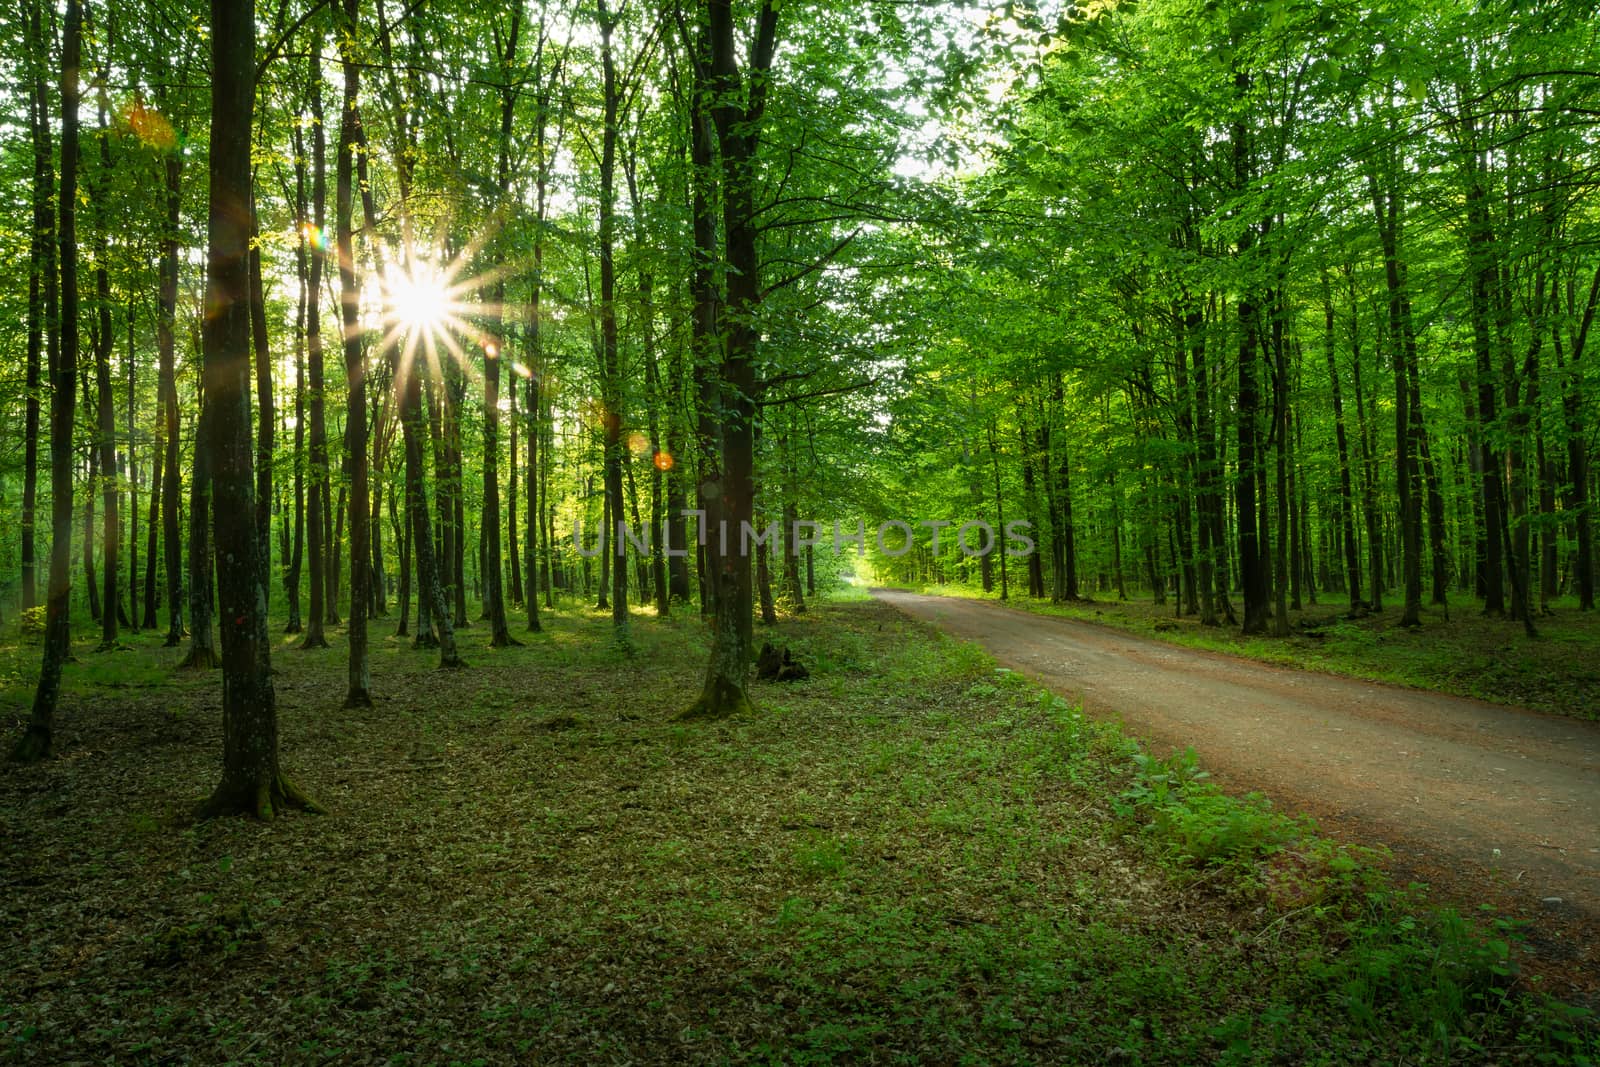 Sun glare in the forest with a dirt road, spring view